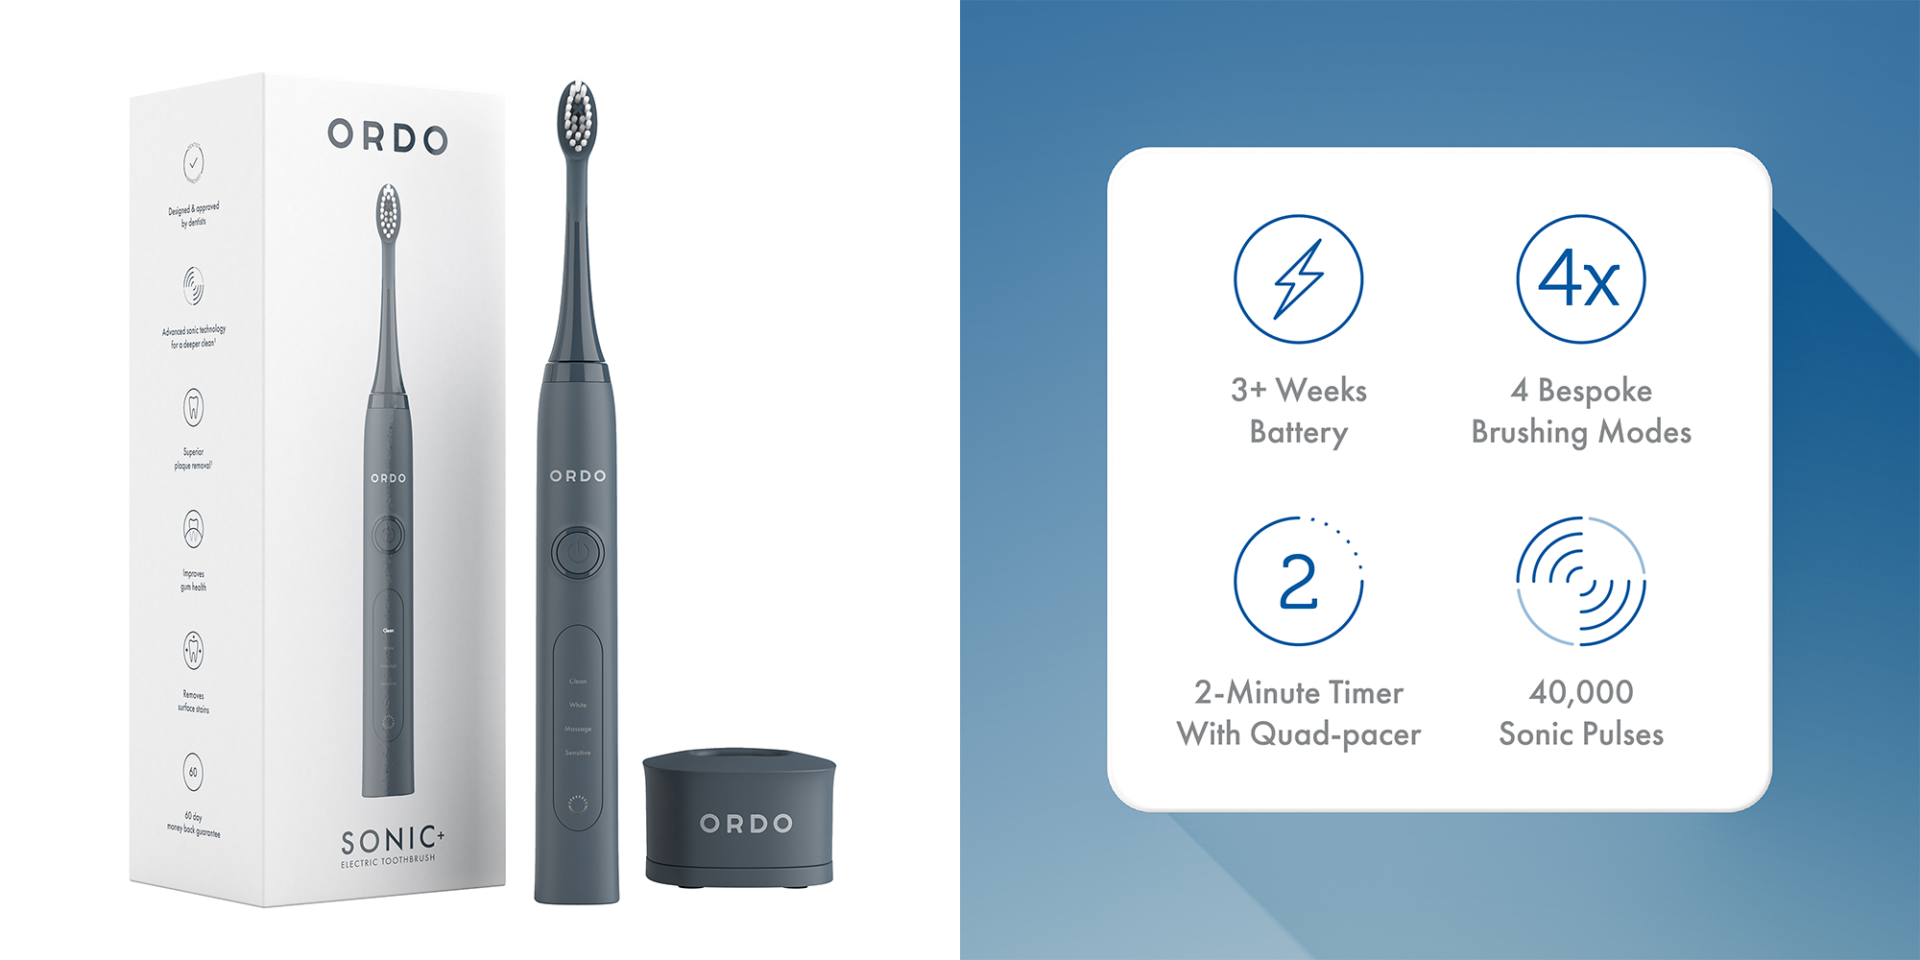 We review the Ordo Sonic+ Electric Toothbrush 21